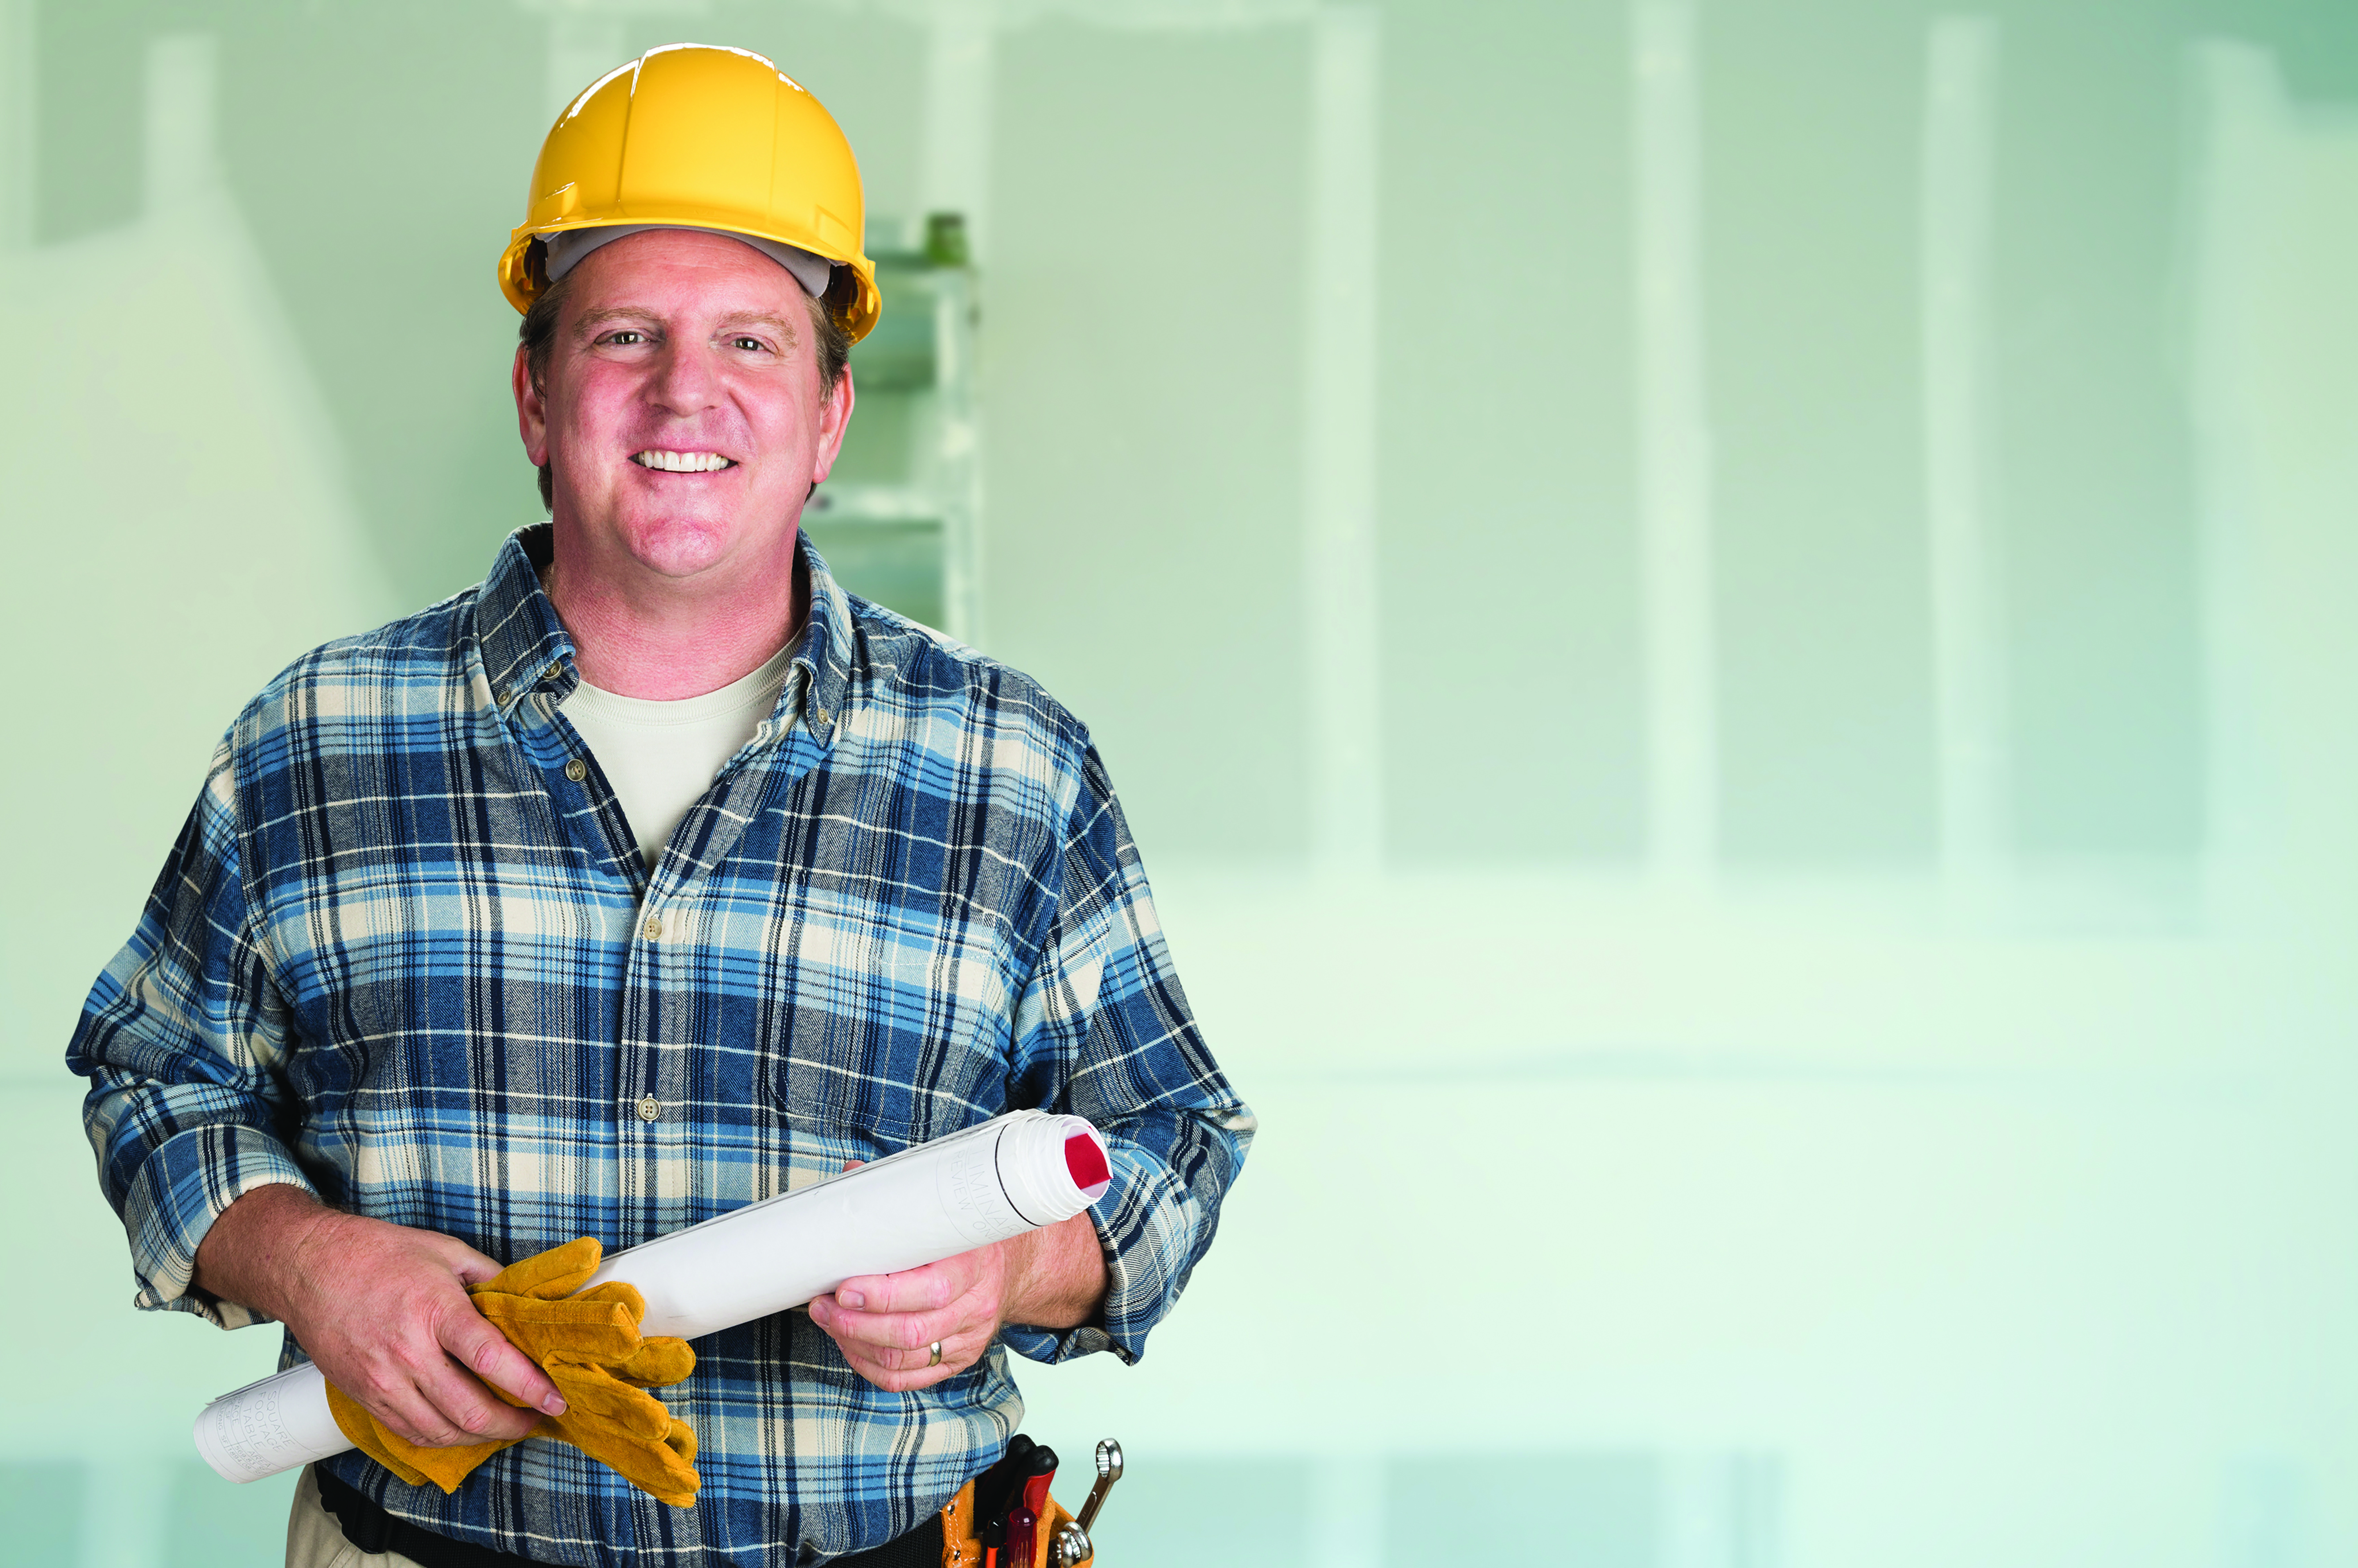 Bigstock flooring contractor holding plans, wearing a hard hat. 